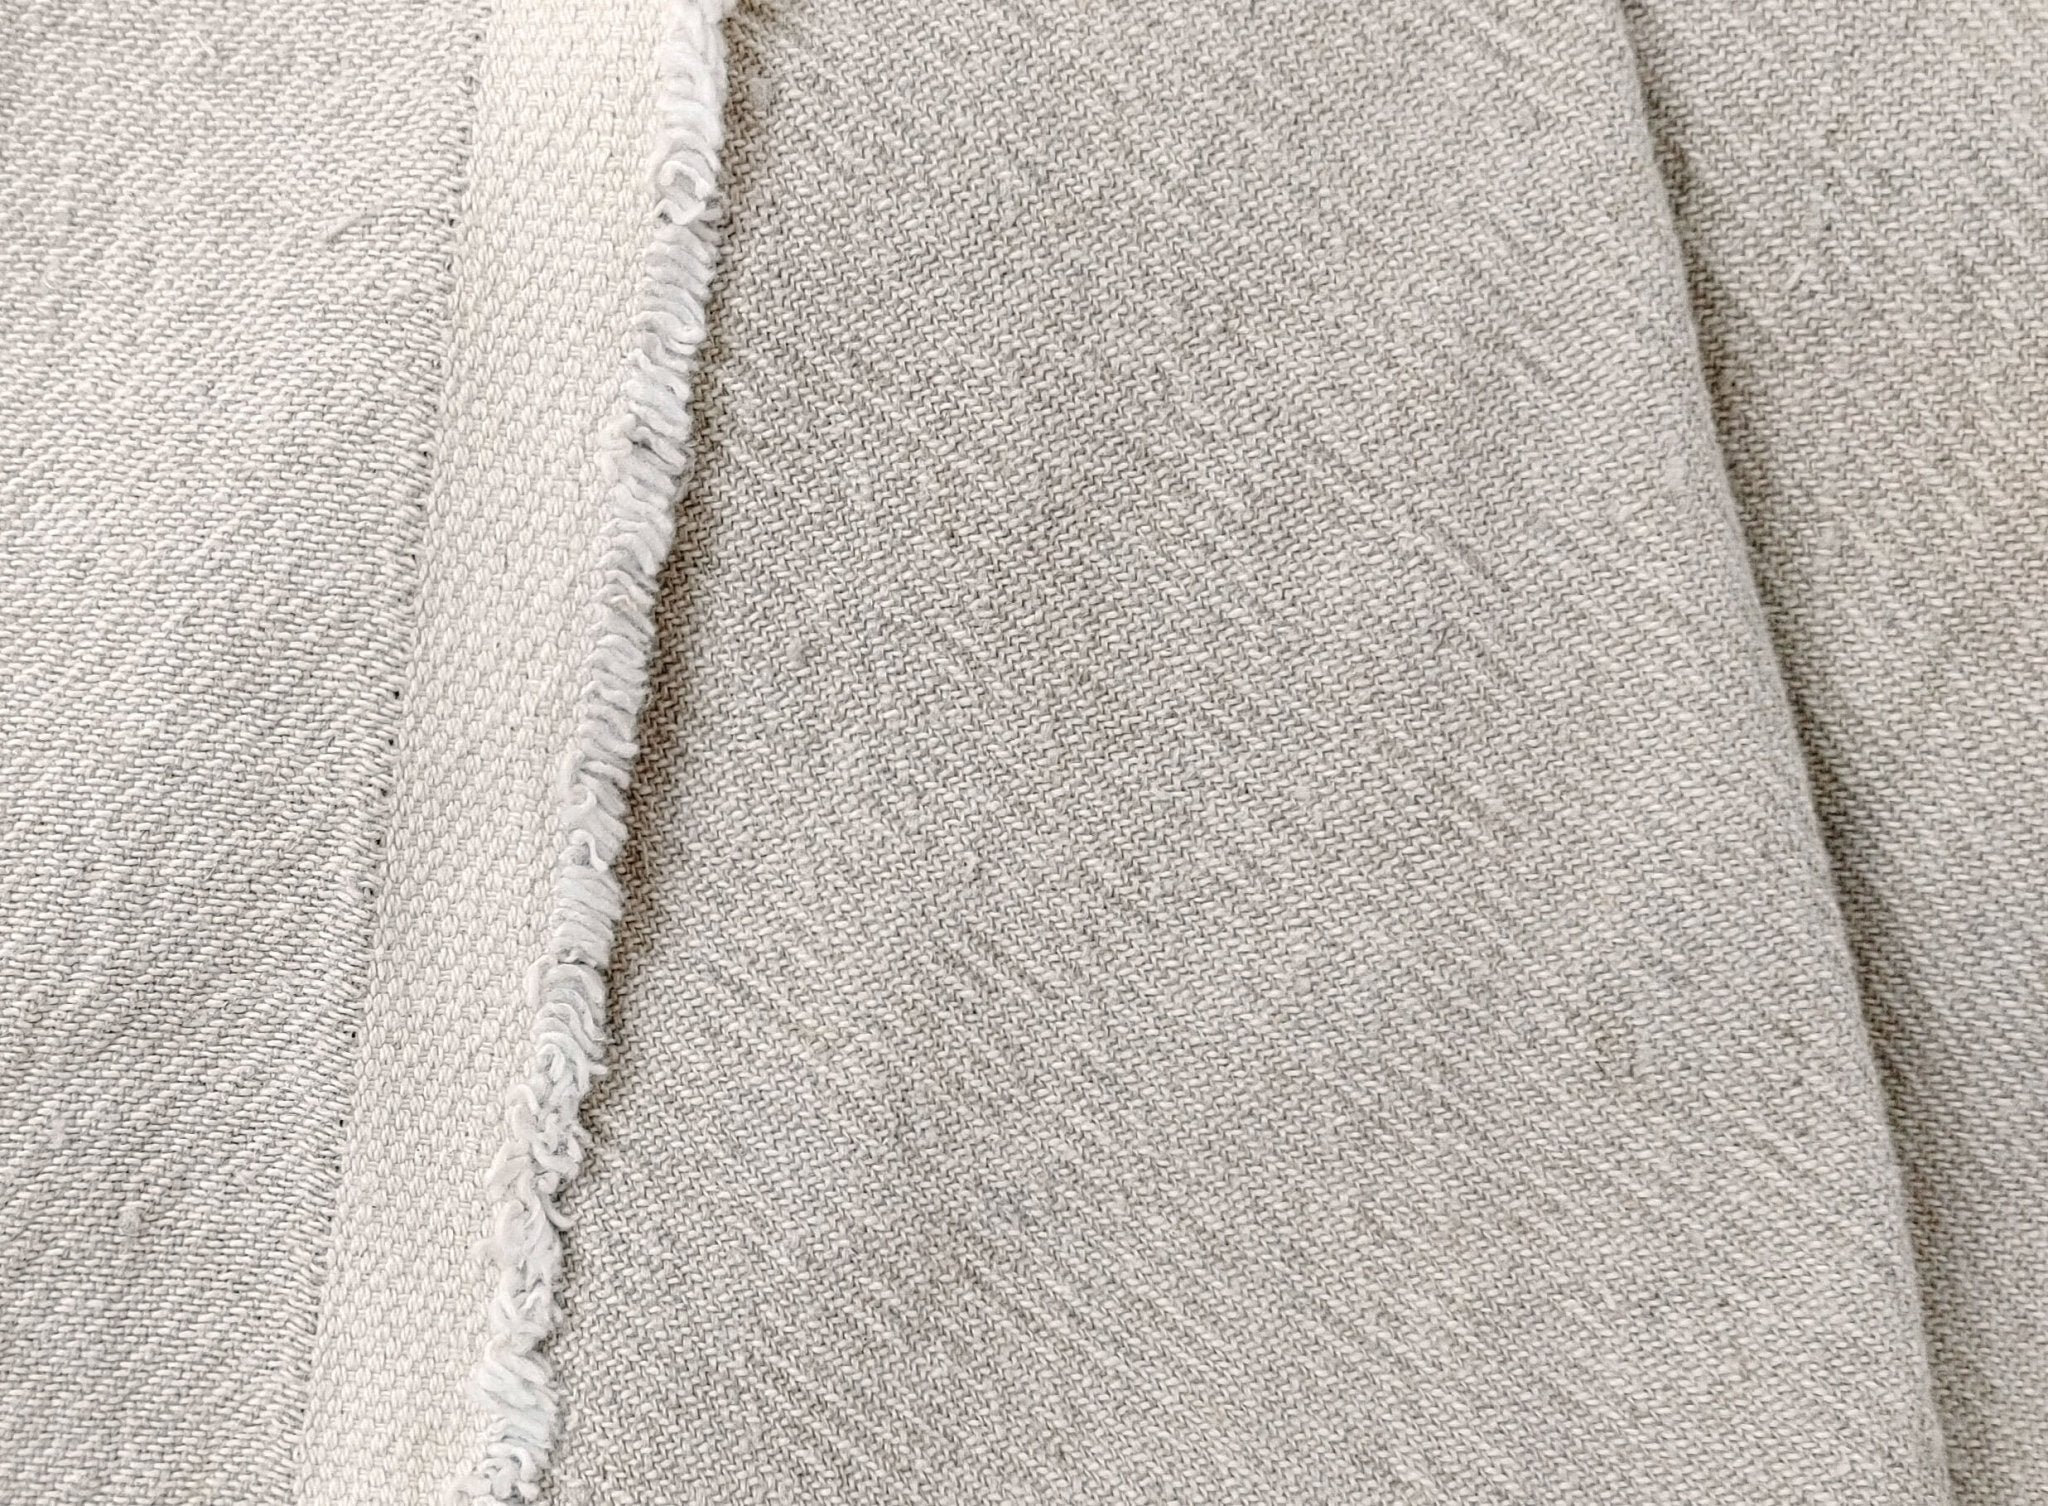 Heavyweight Linen Cotton Twill Fabric with Two-Tone Chambray 7258 7259 7331 7332 - The Linen Lab - Natural